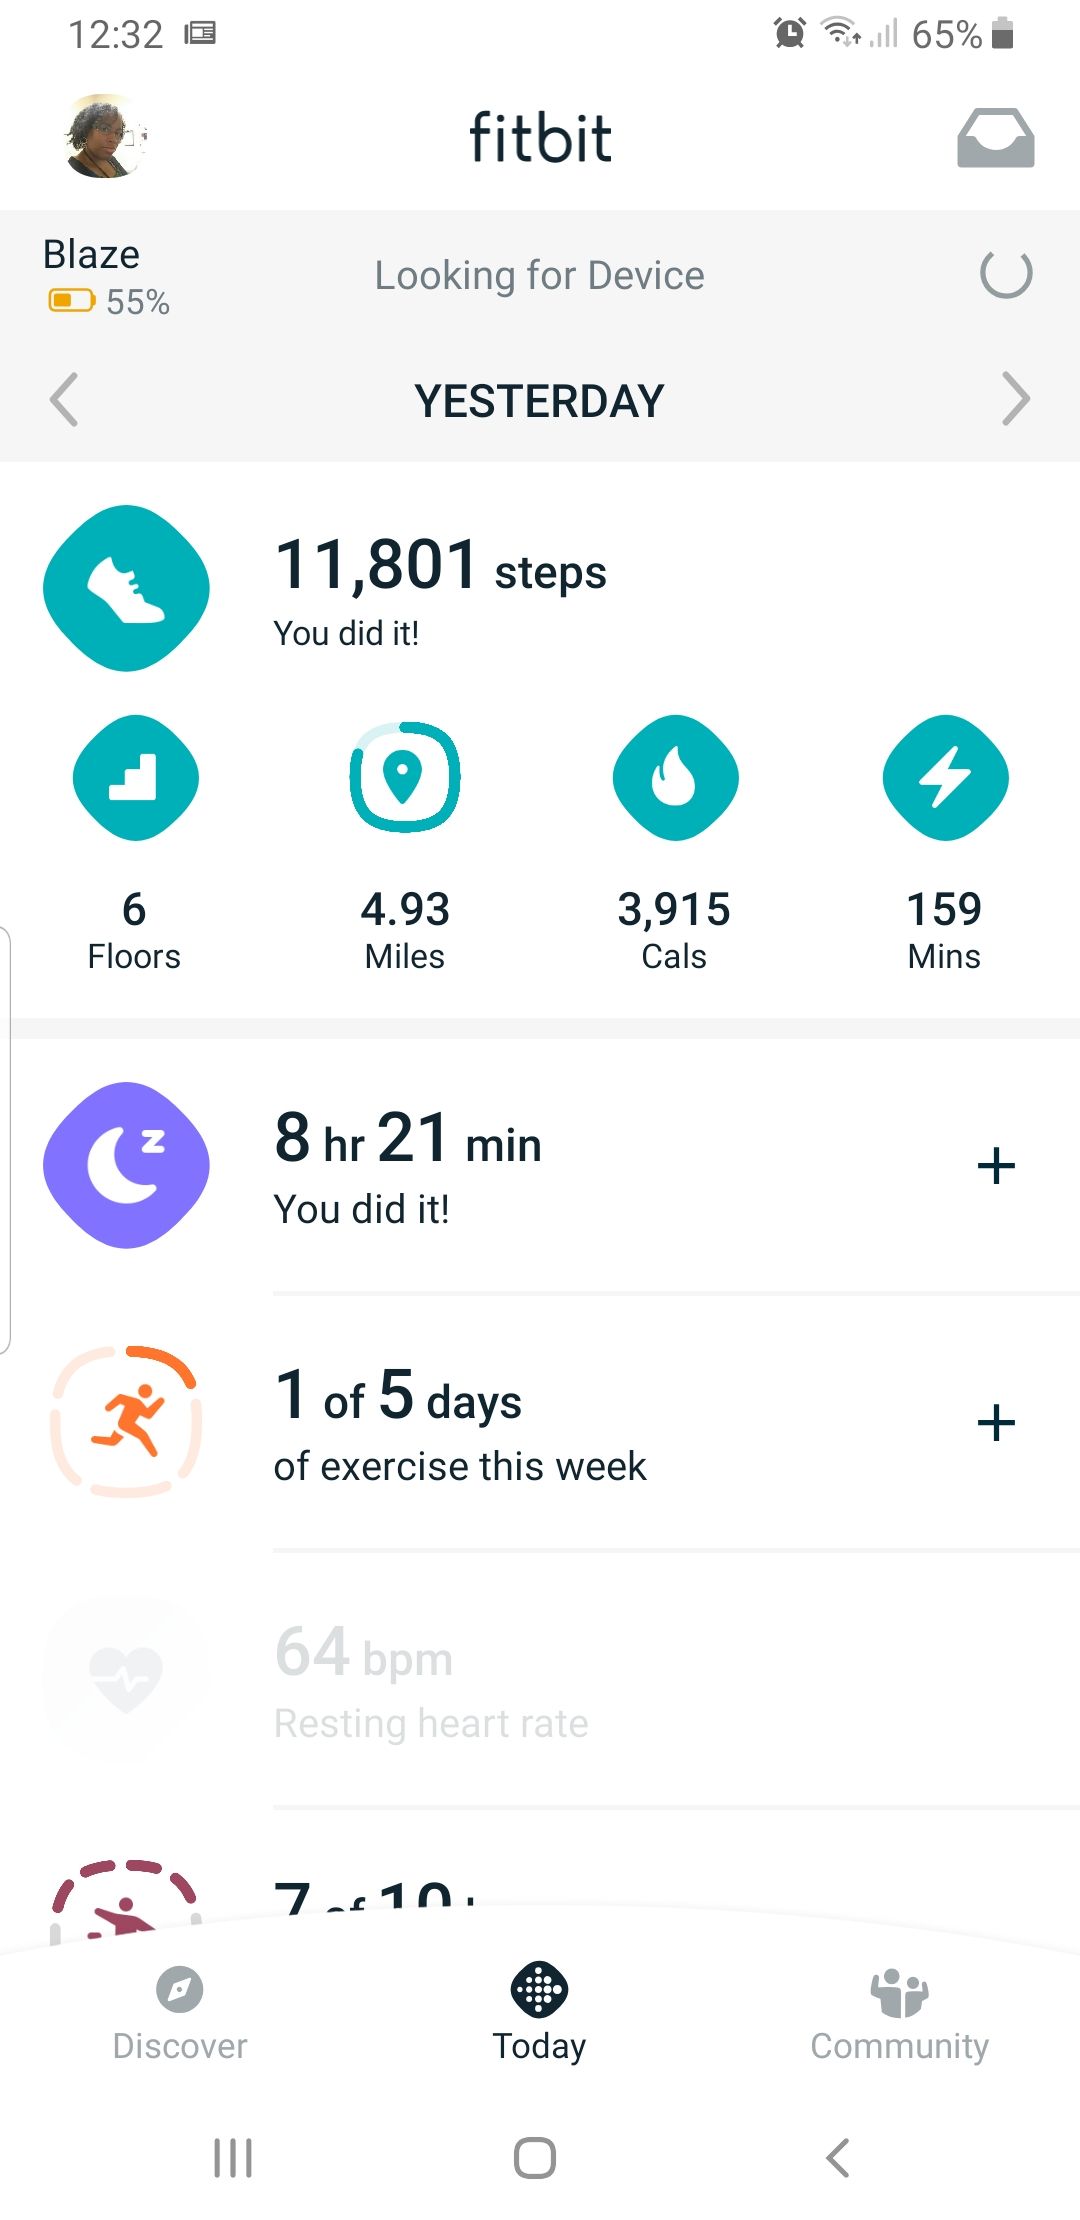 fitbit app android version